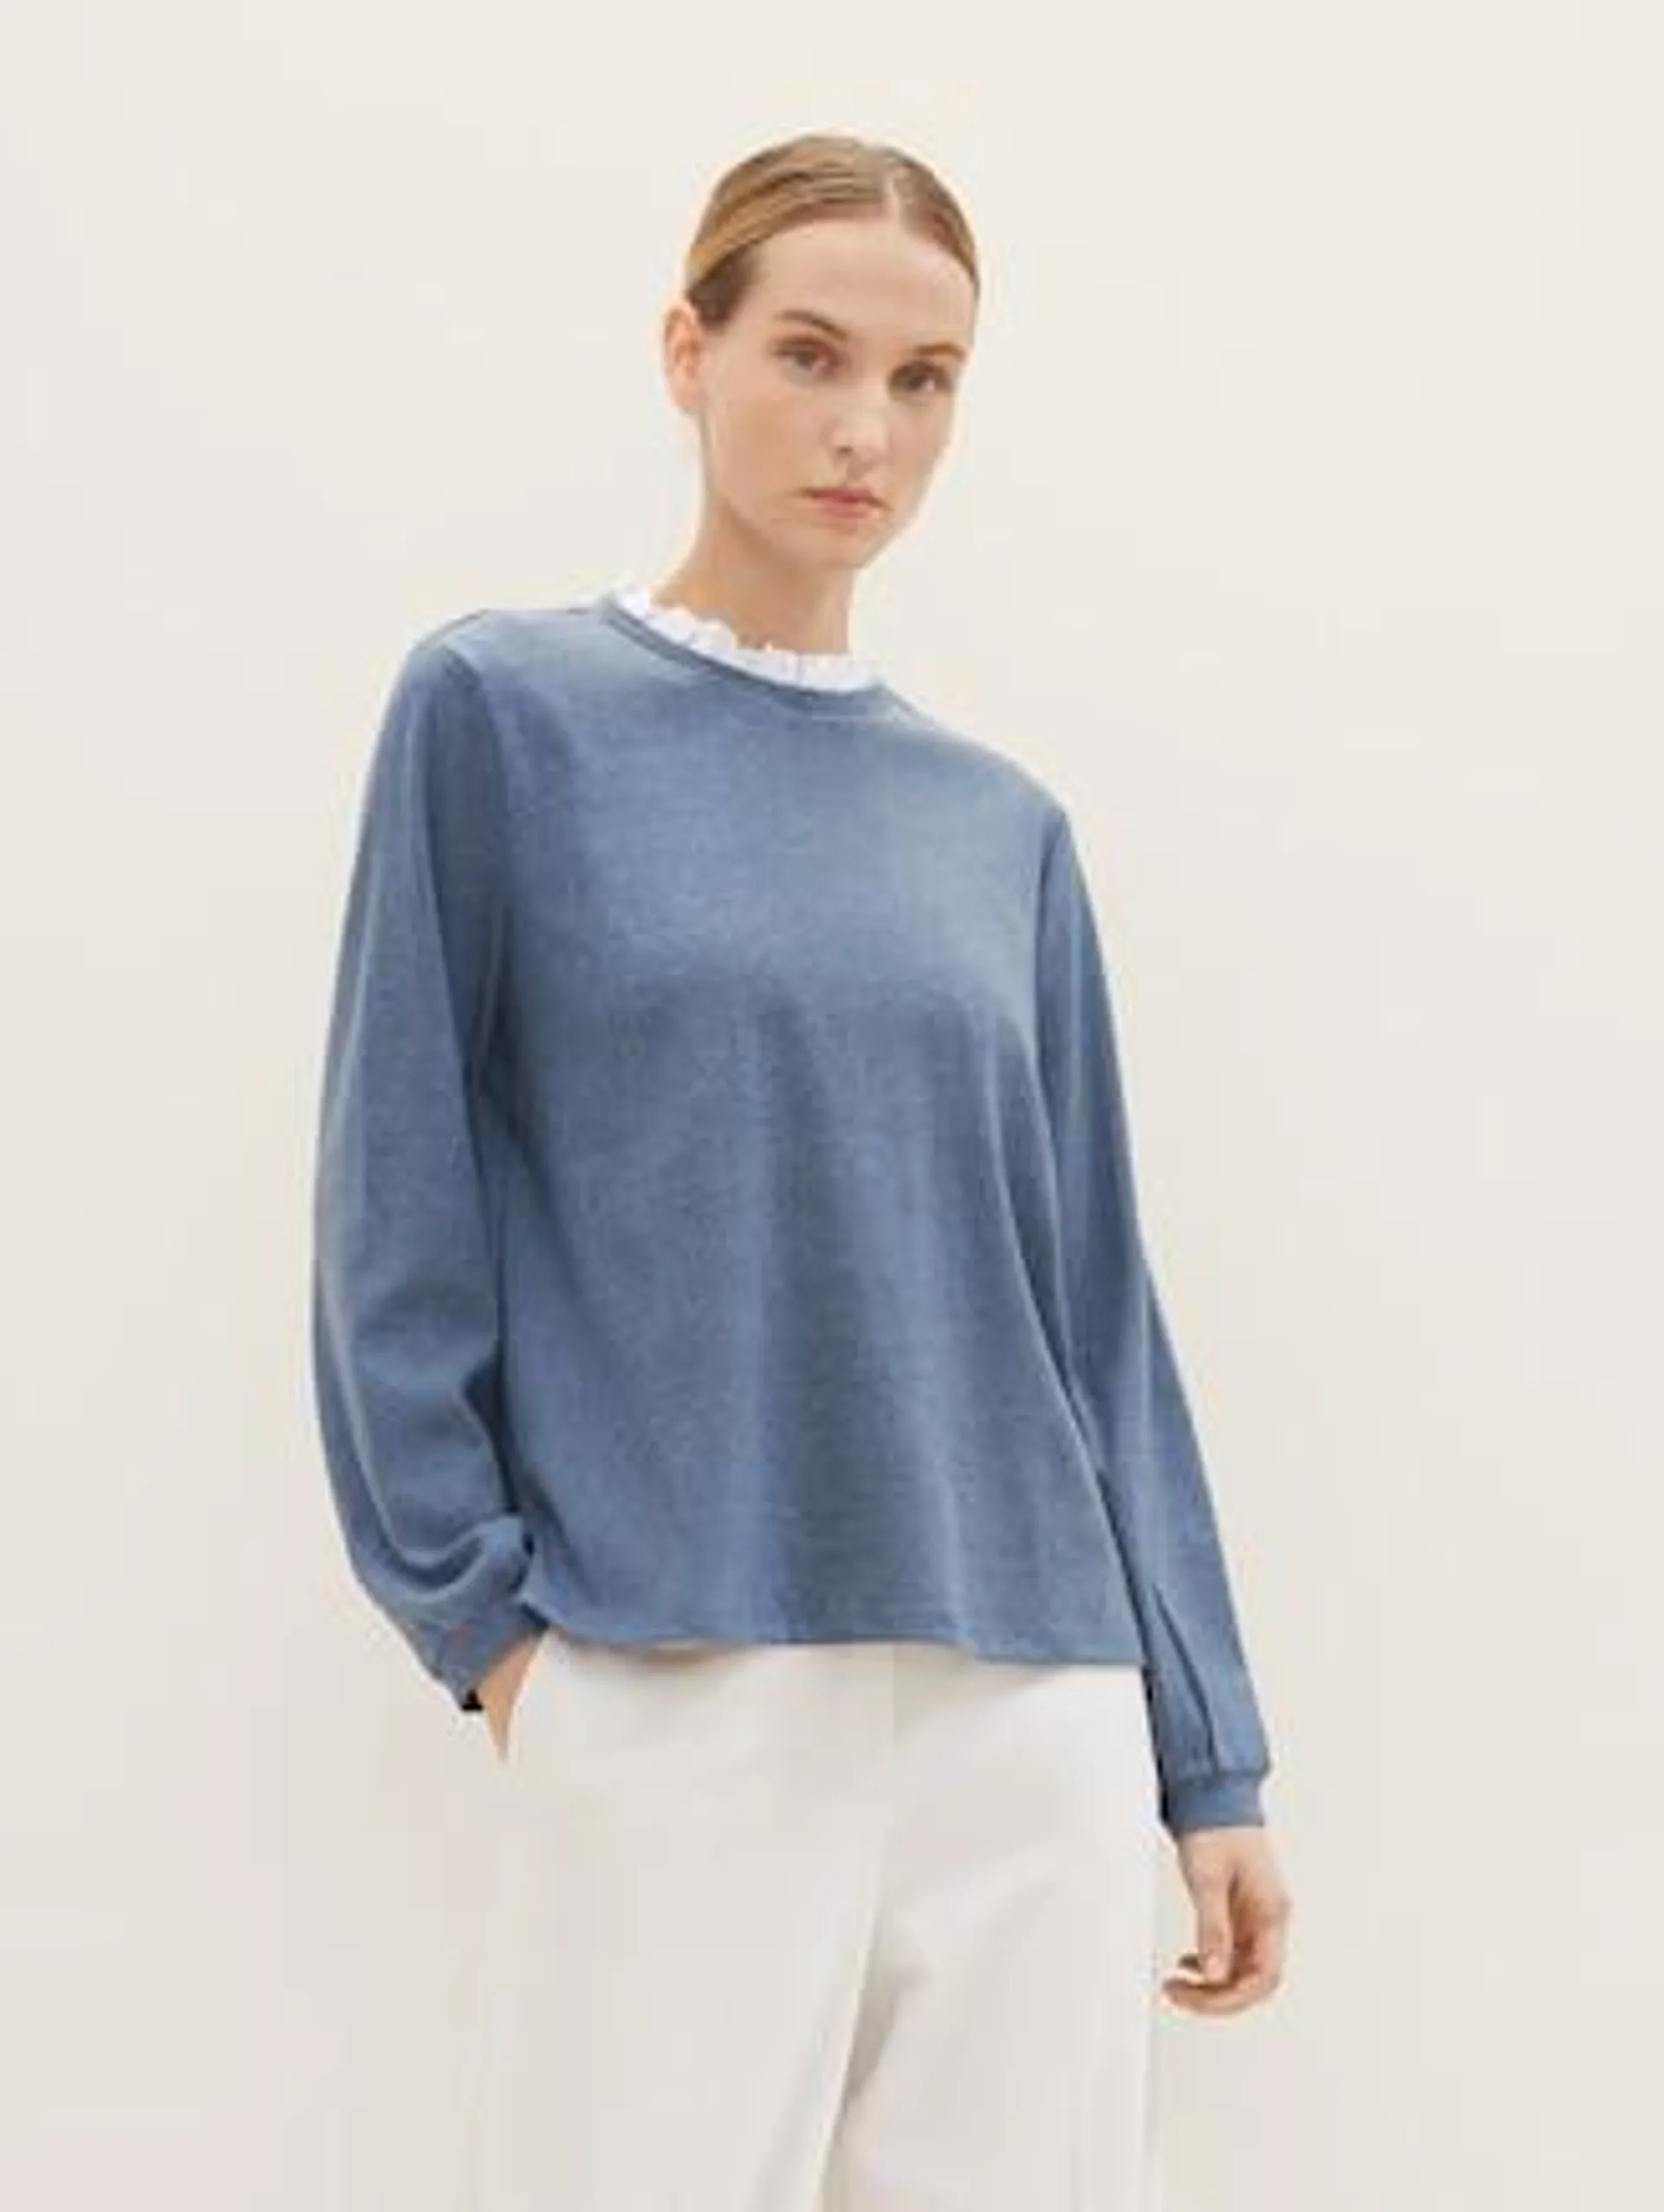 Sweatshirt with a stand-up collar